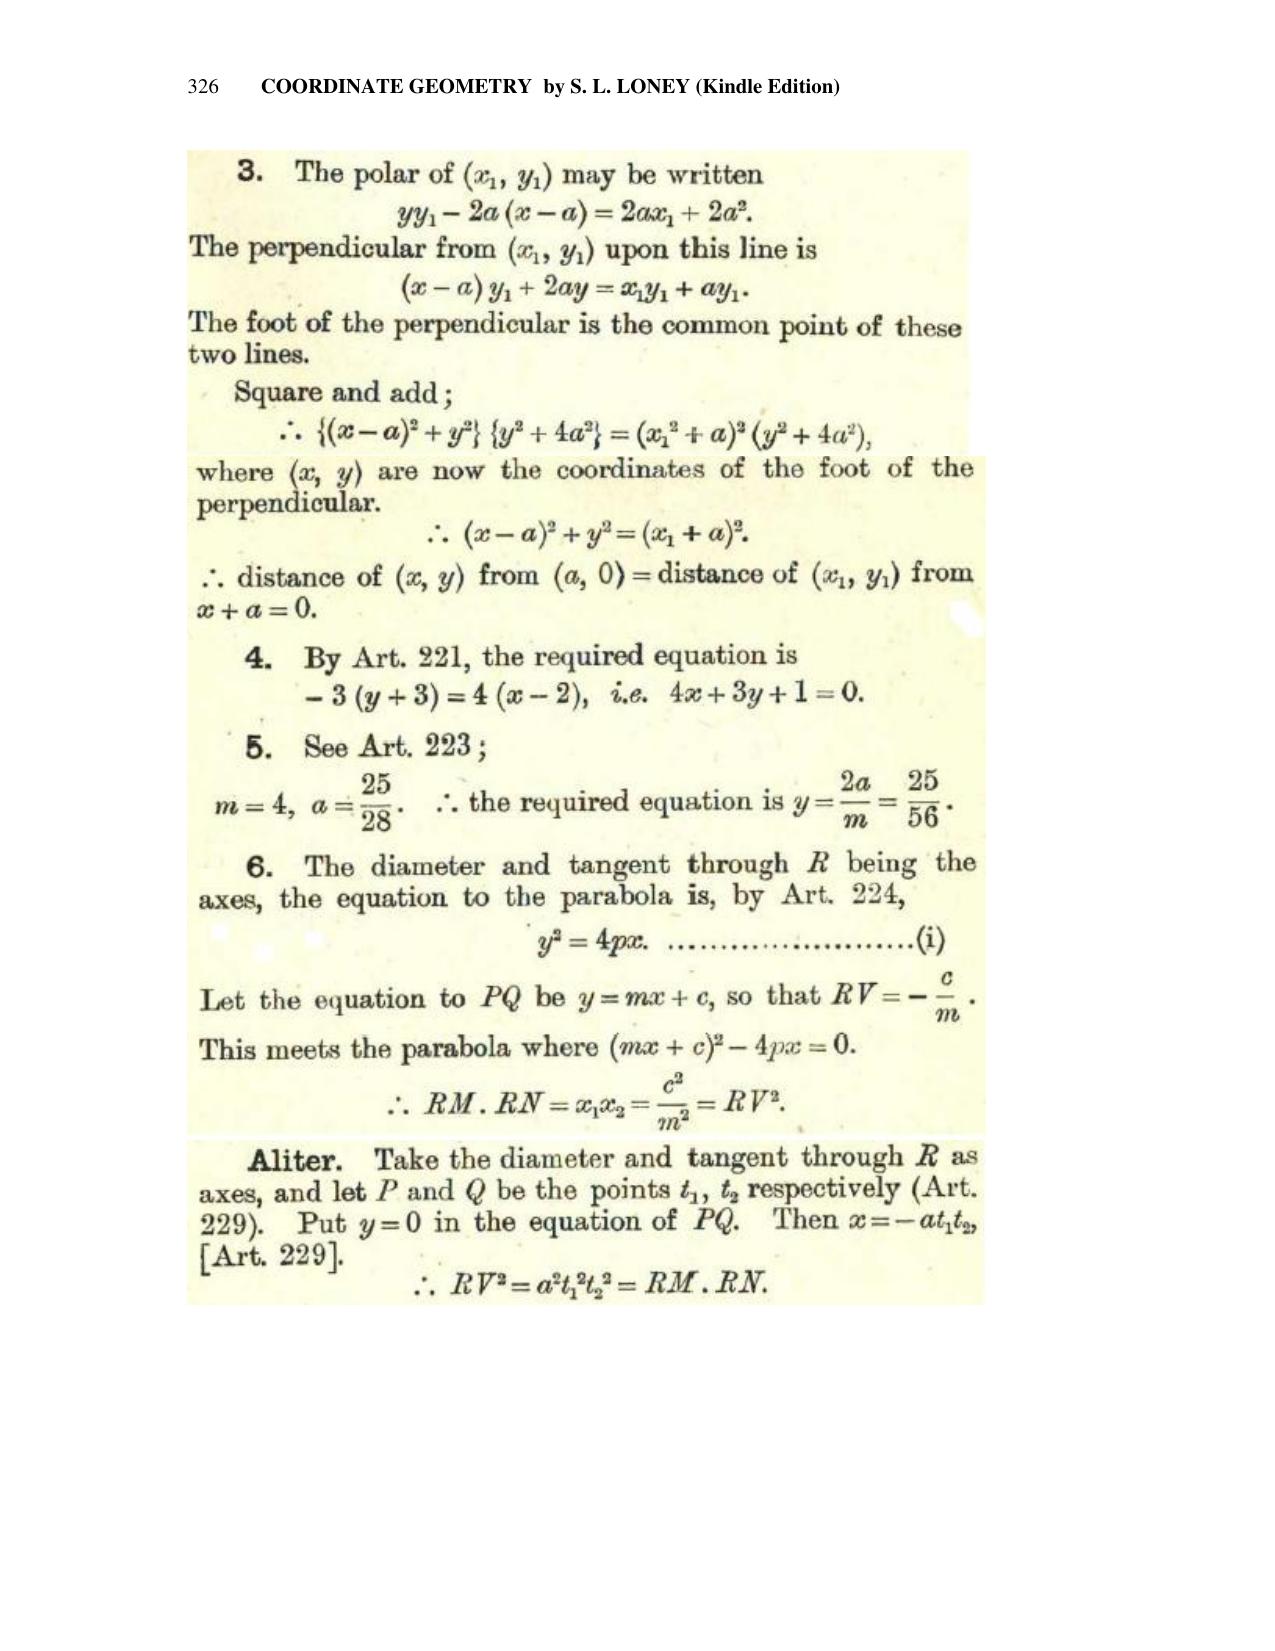 Chapter 10: The Parabola - SL Loney Solutions: The Elements of Coordinate Geometry - Page 40